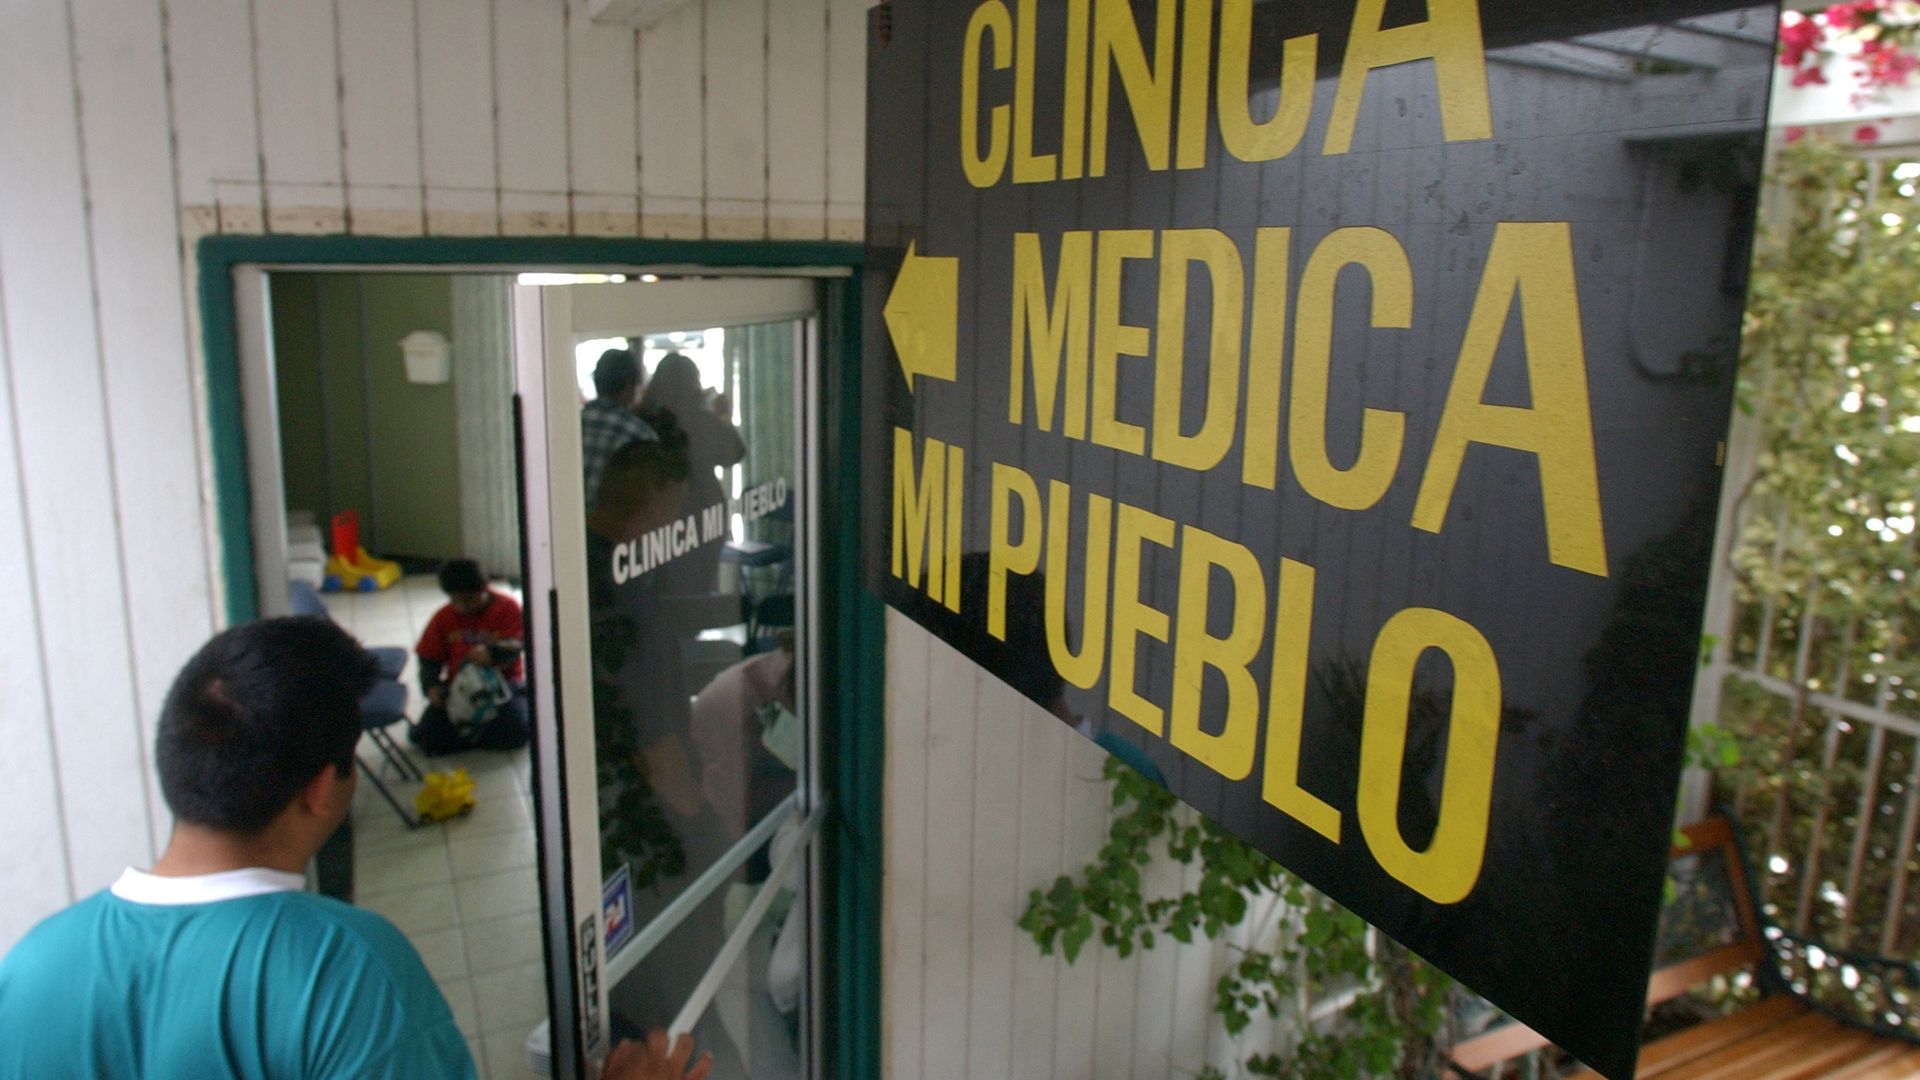 Mi Pueblo clinic is just one of two dozen or so facilities in Orange County that vie for customers among the large, often uninsured immigrant population in Orange County. 